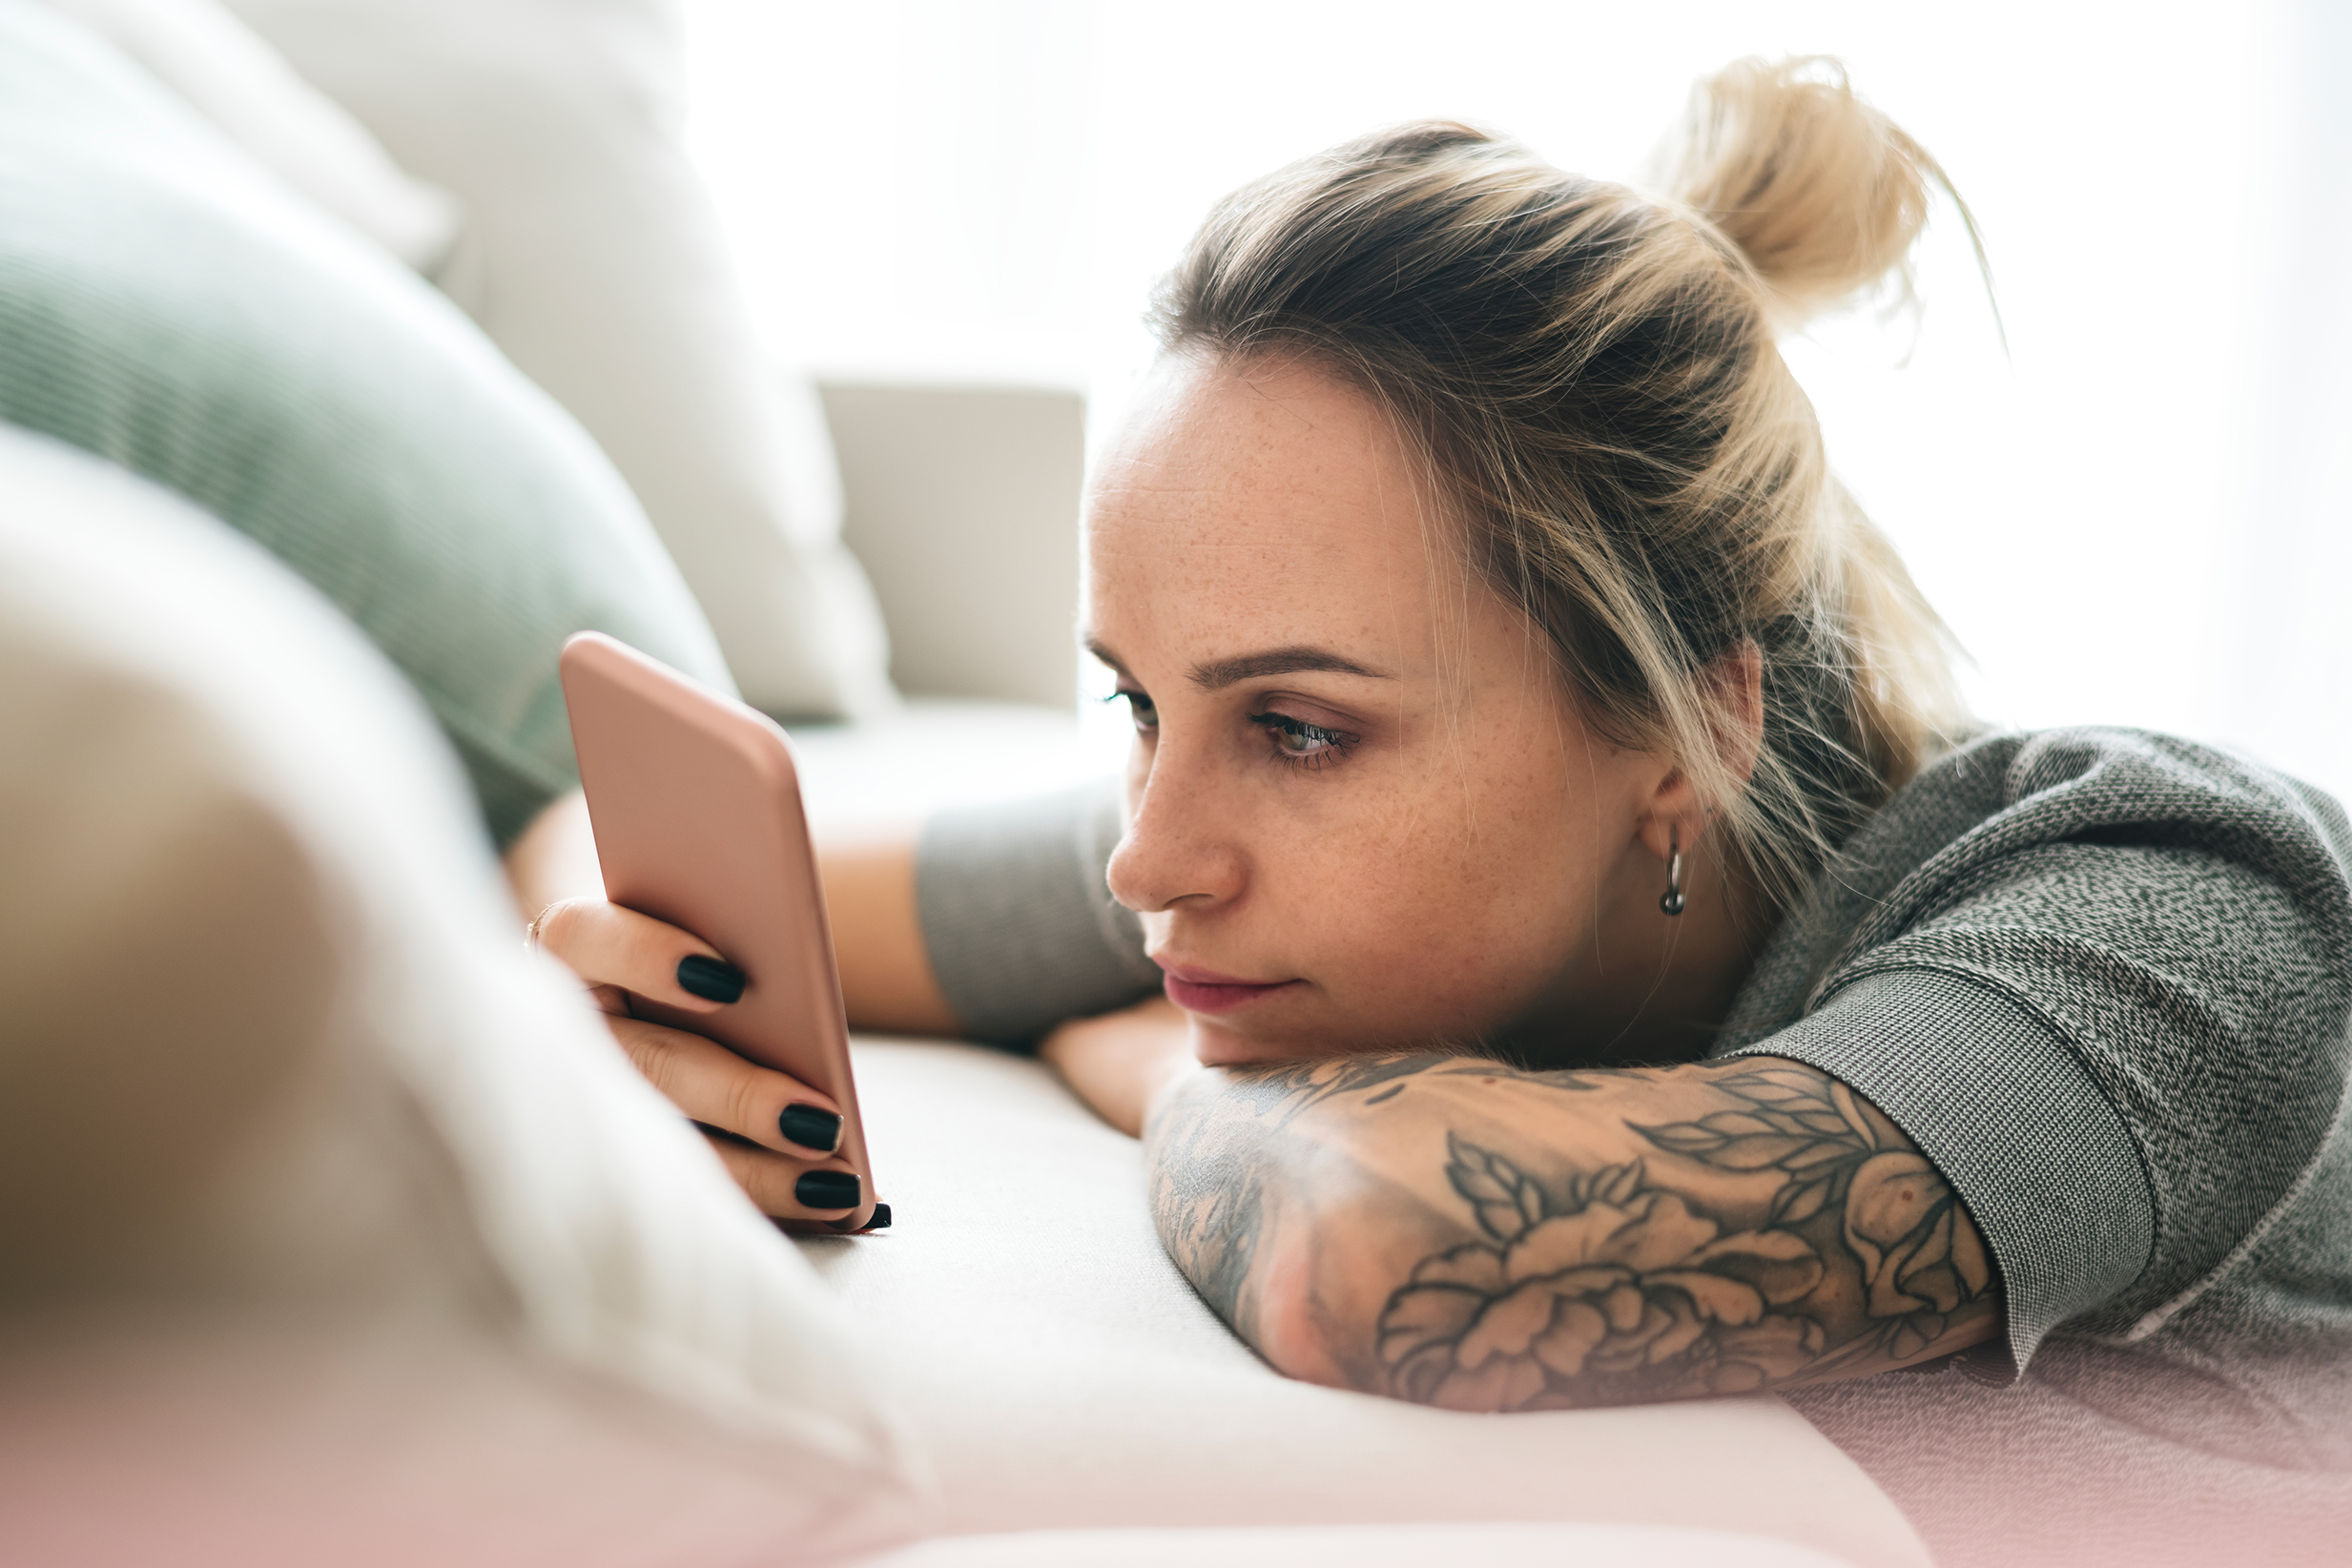 Young woman with arm tattoos looking at phone